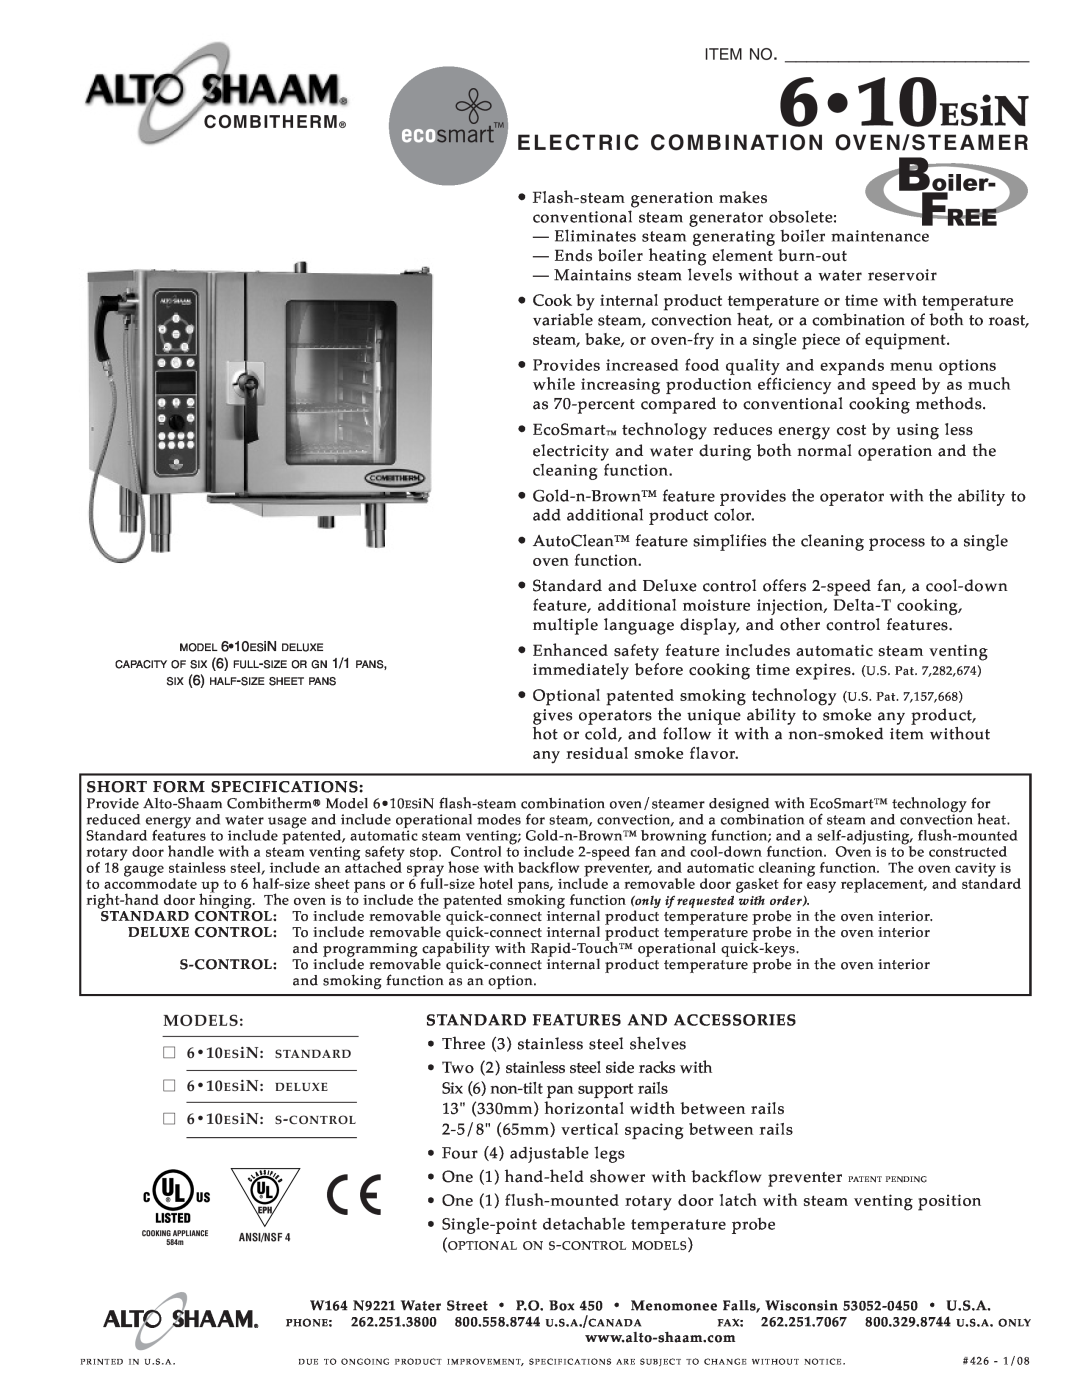 Alto-Shaam 6.10ESiN specifications 610ESiN, Elect Ric Combina Tion, Oven/S Teame R, Item No, Combitherm 